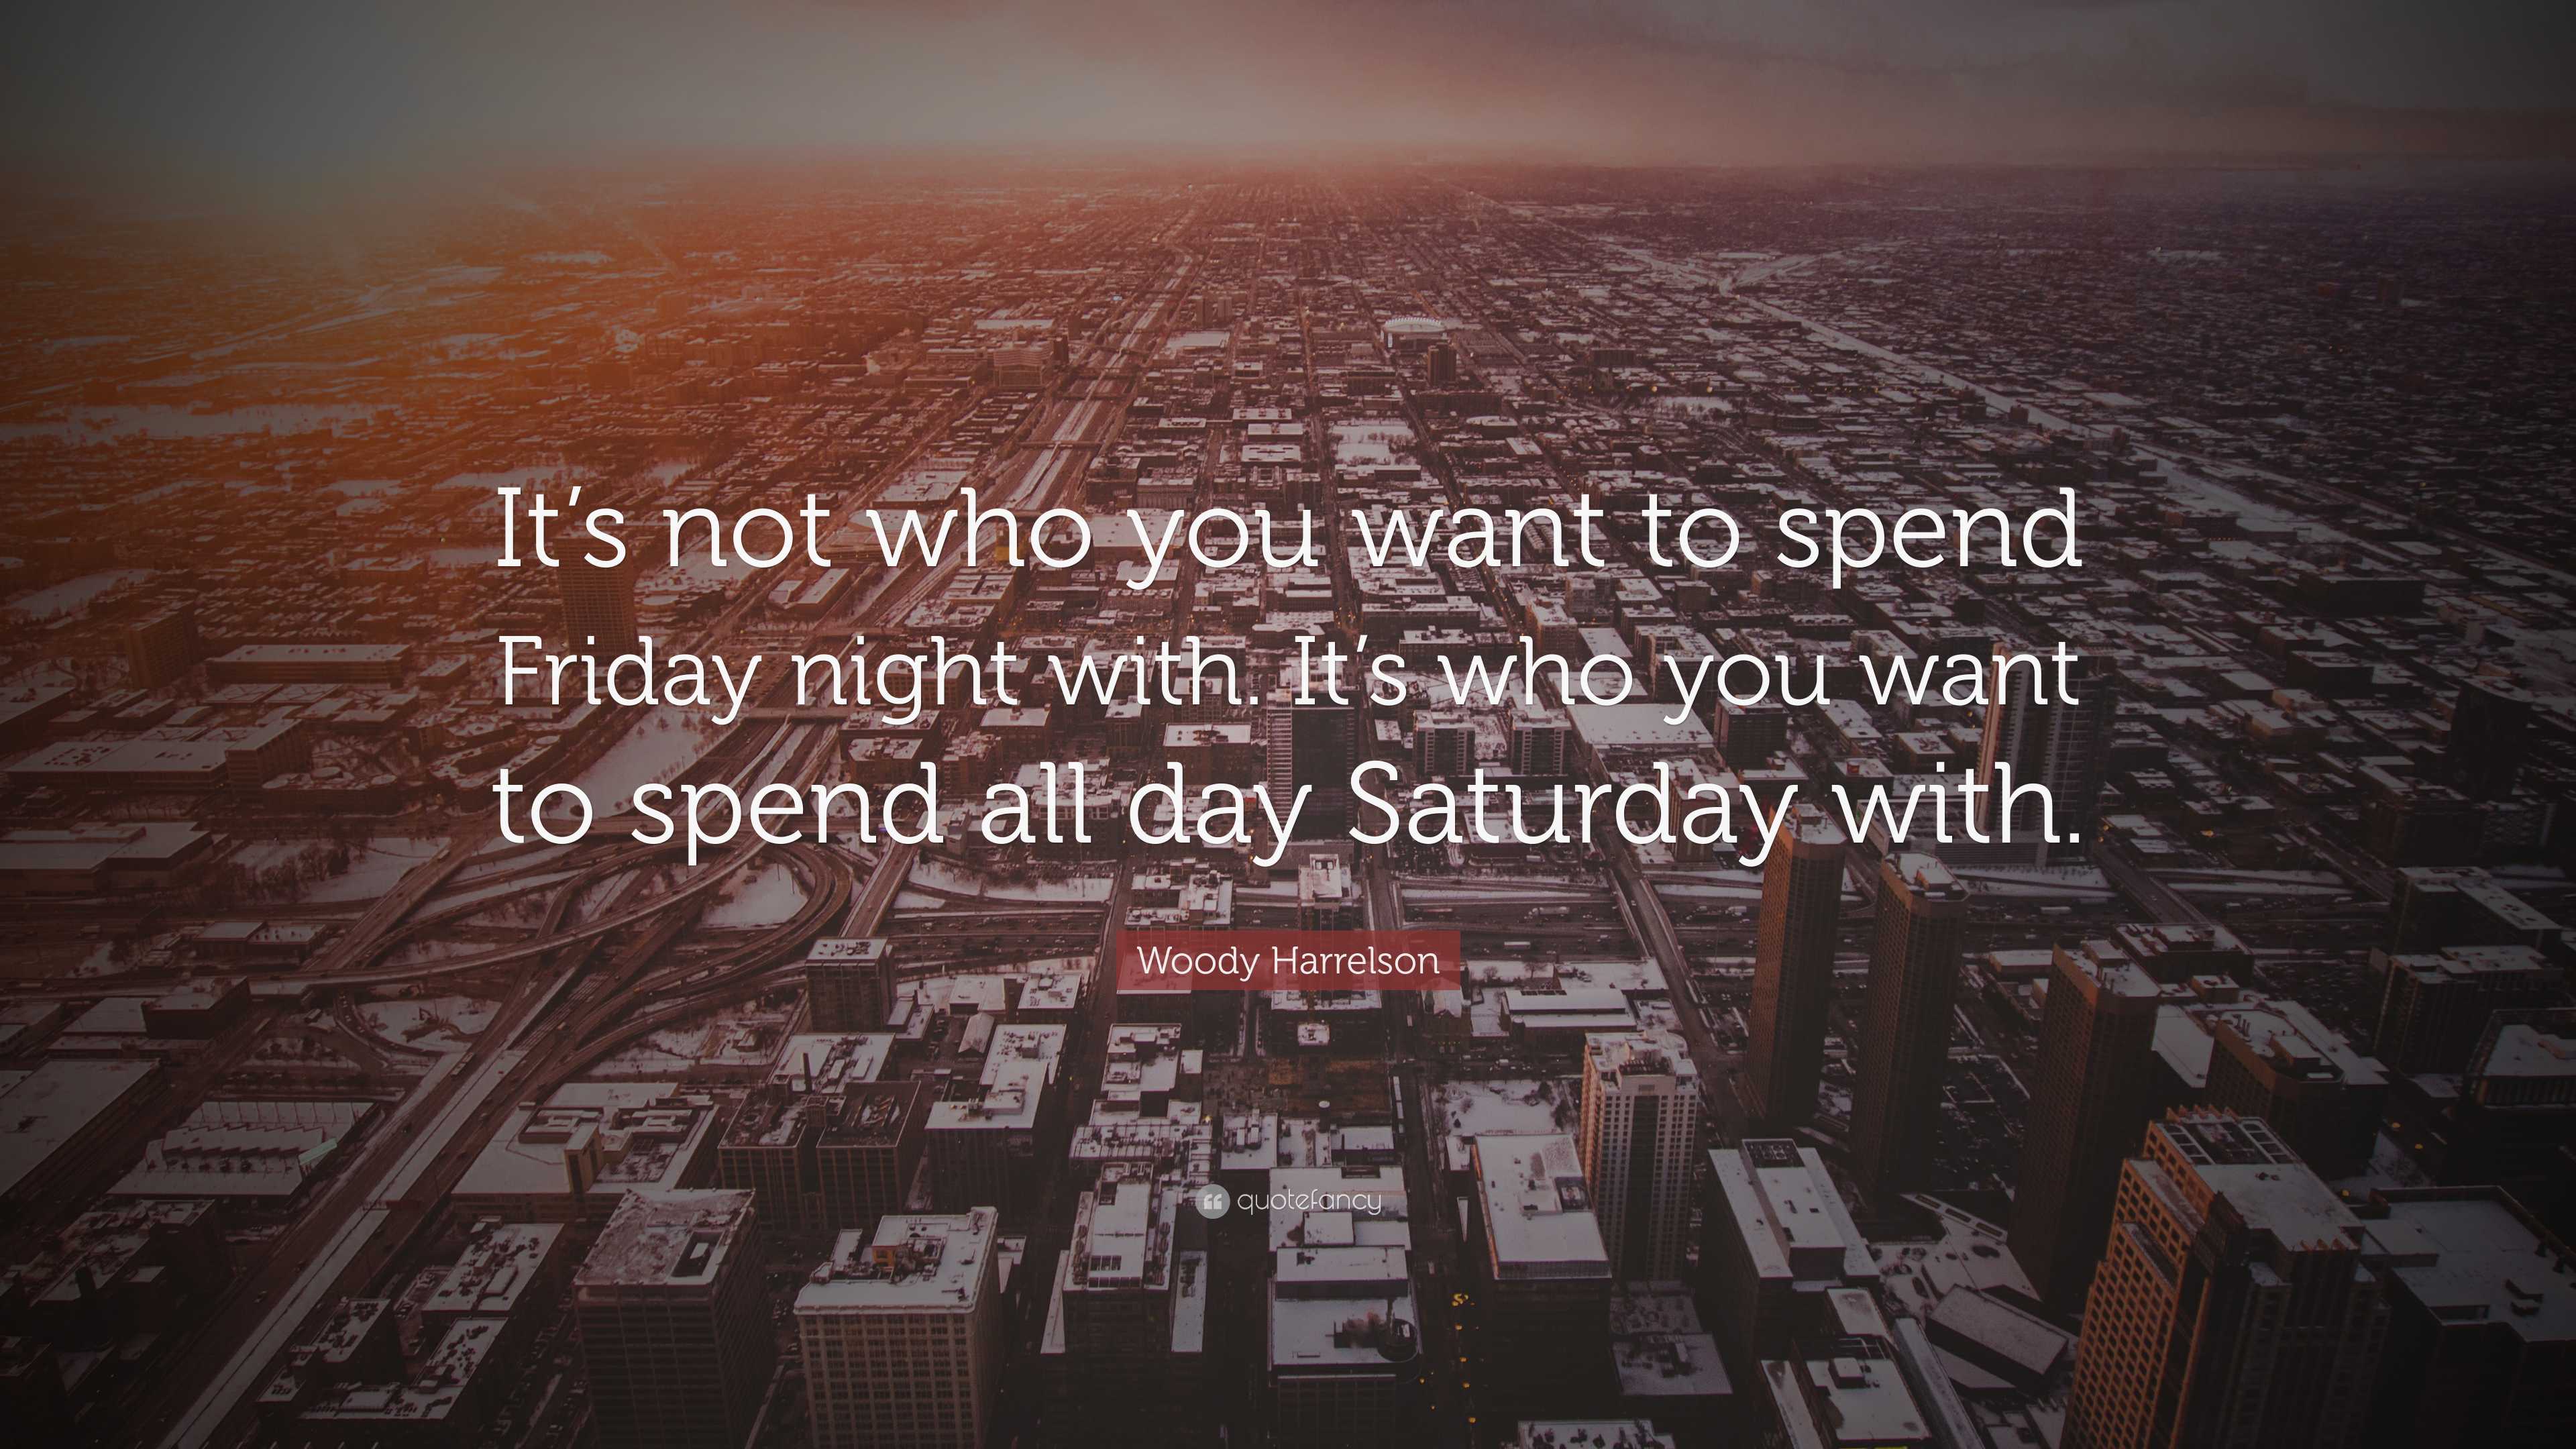 Woody Harrelson Quote: “It's not who you want to spend Friday night with.  It's who you